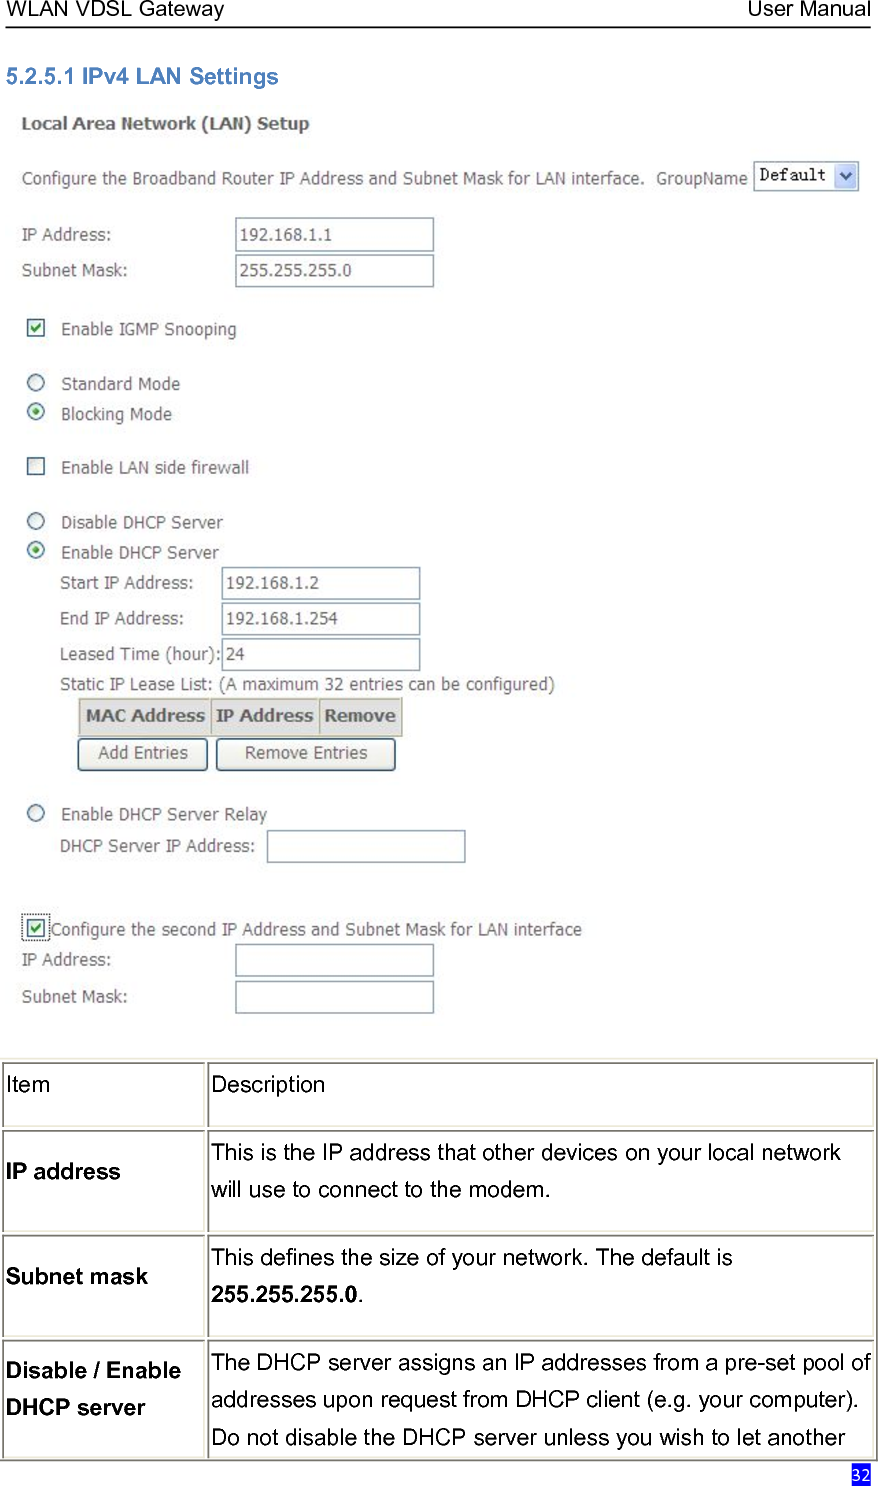 WLAN VDSL Gateway User Manual325.2.5.1 IPv4 LAN SettingsItemDescriptionIP addressThis is the IP address that other devices on your local networkwill use to connect to the modem.Subnet maskThis defines the size of your network. The default is255.255.255.0.Disable / EnableDHCP serverThe DHCP server assigns an IP addresses from a pre-set pool ofaddresses upon request from DHCP client (e.g. your computer).Do not disable the DHCP server unless you wish to let another